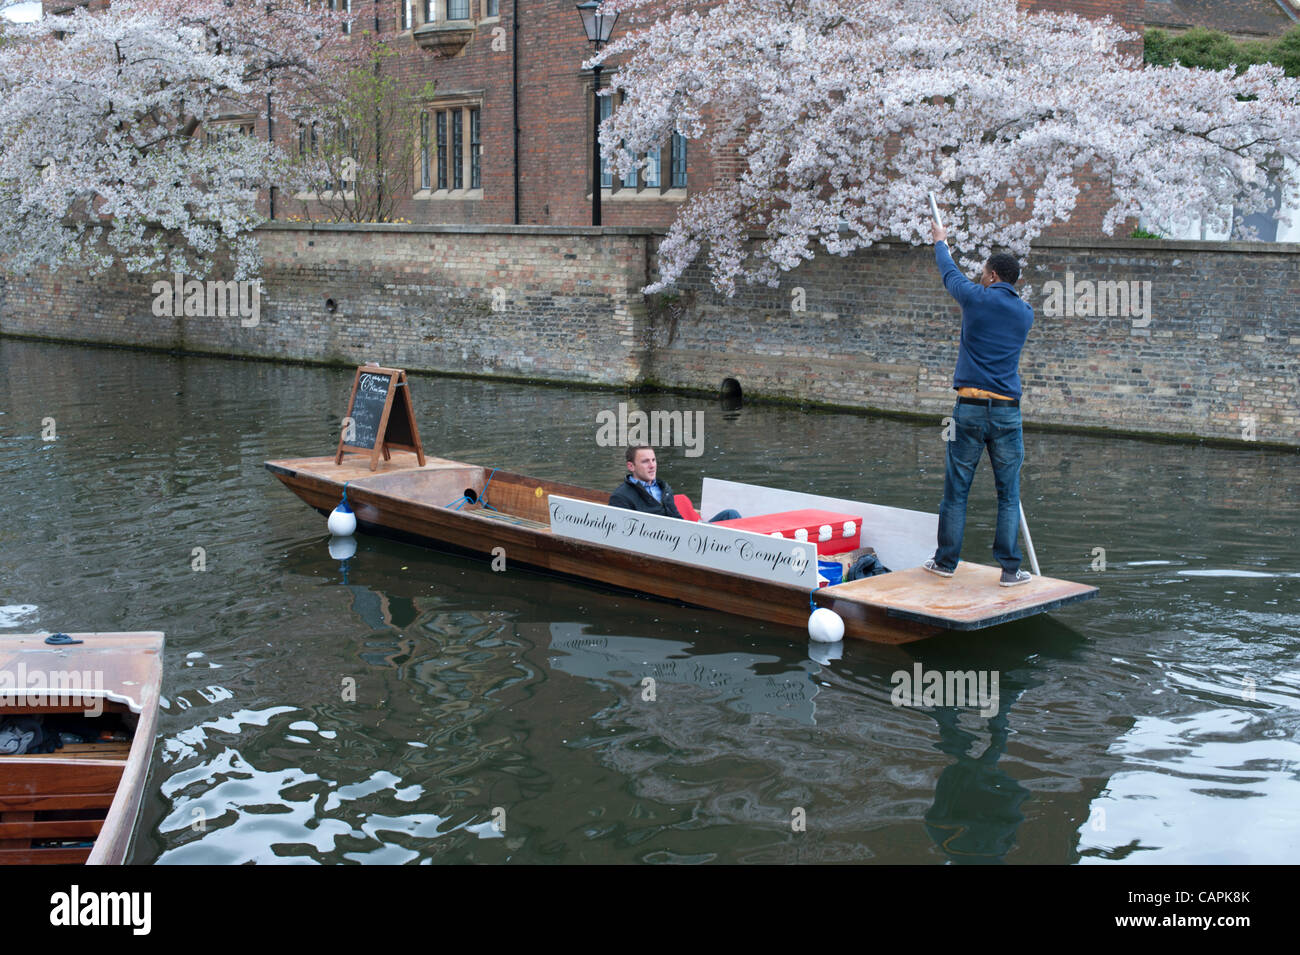 The Cambridge Floating Wine Company punt cruising on the River Cam, Cambridge UK 7/4/12. The punt started trading this weekend selling alcoholic drinks people on the River. It is the first of its kind at the tourist attraction which gets thousands of visitors a year. Stock Photo